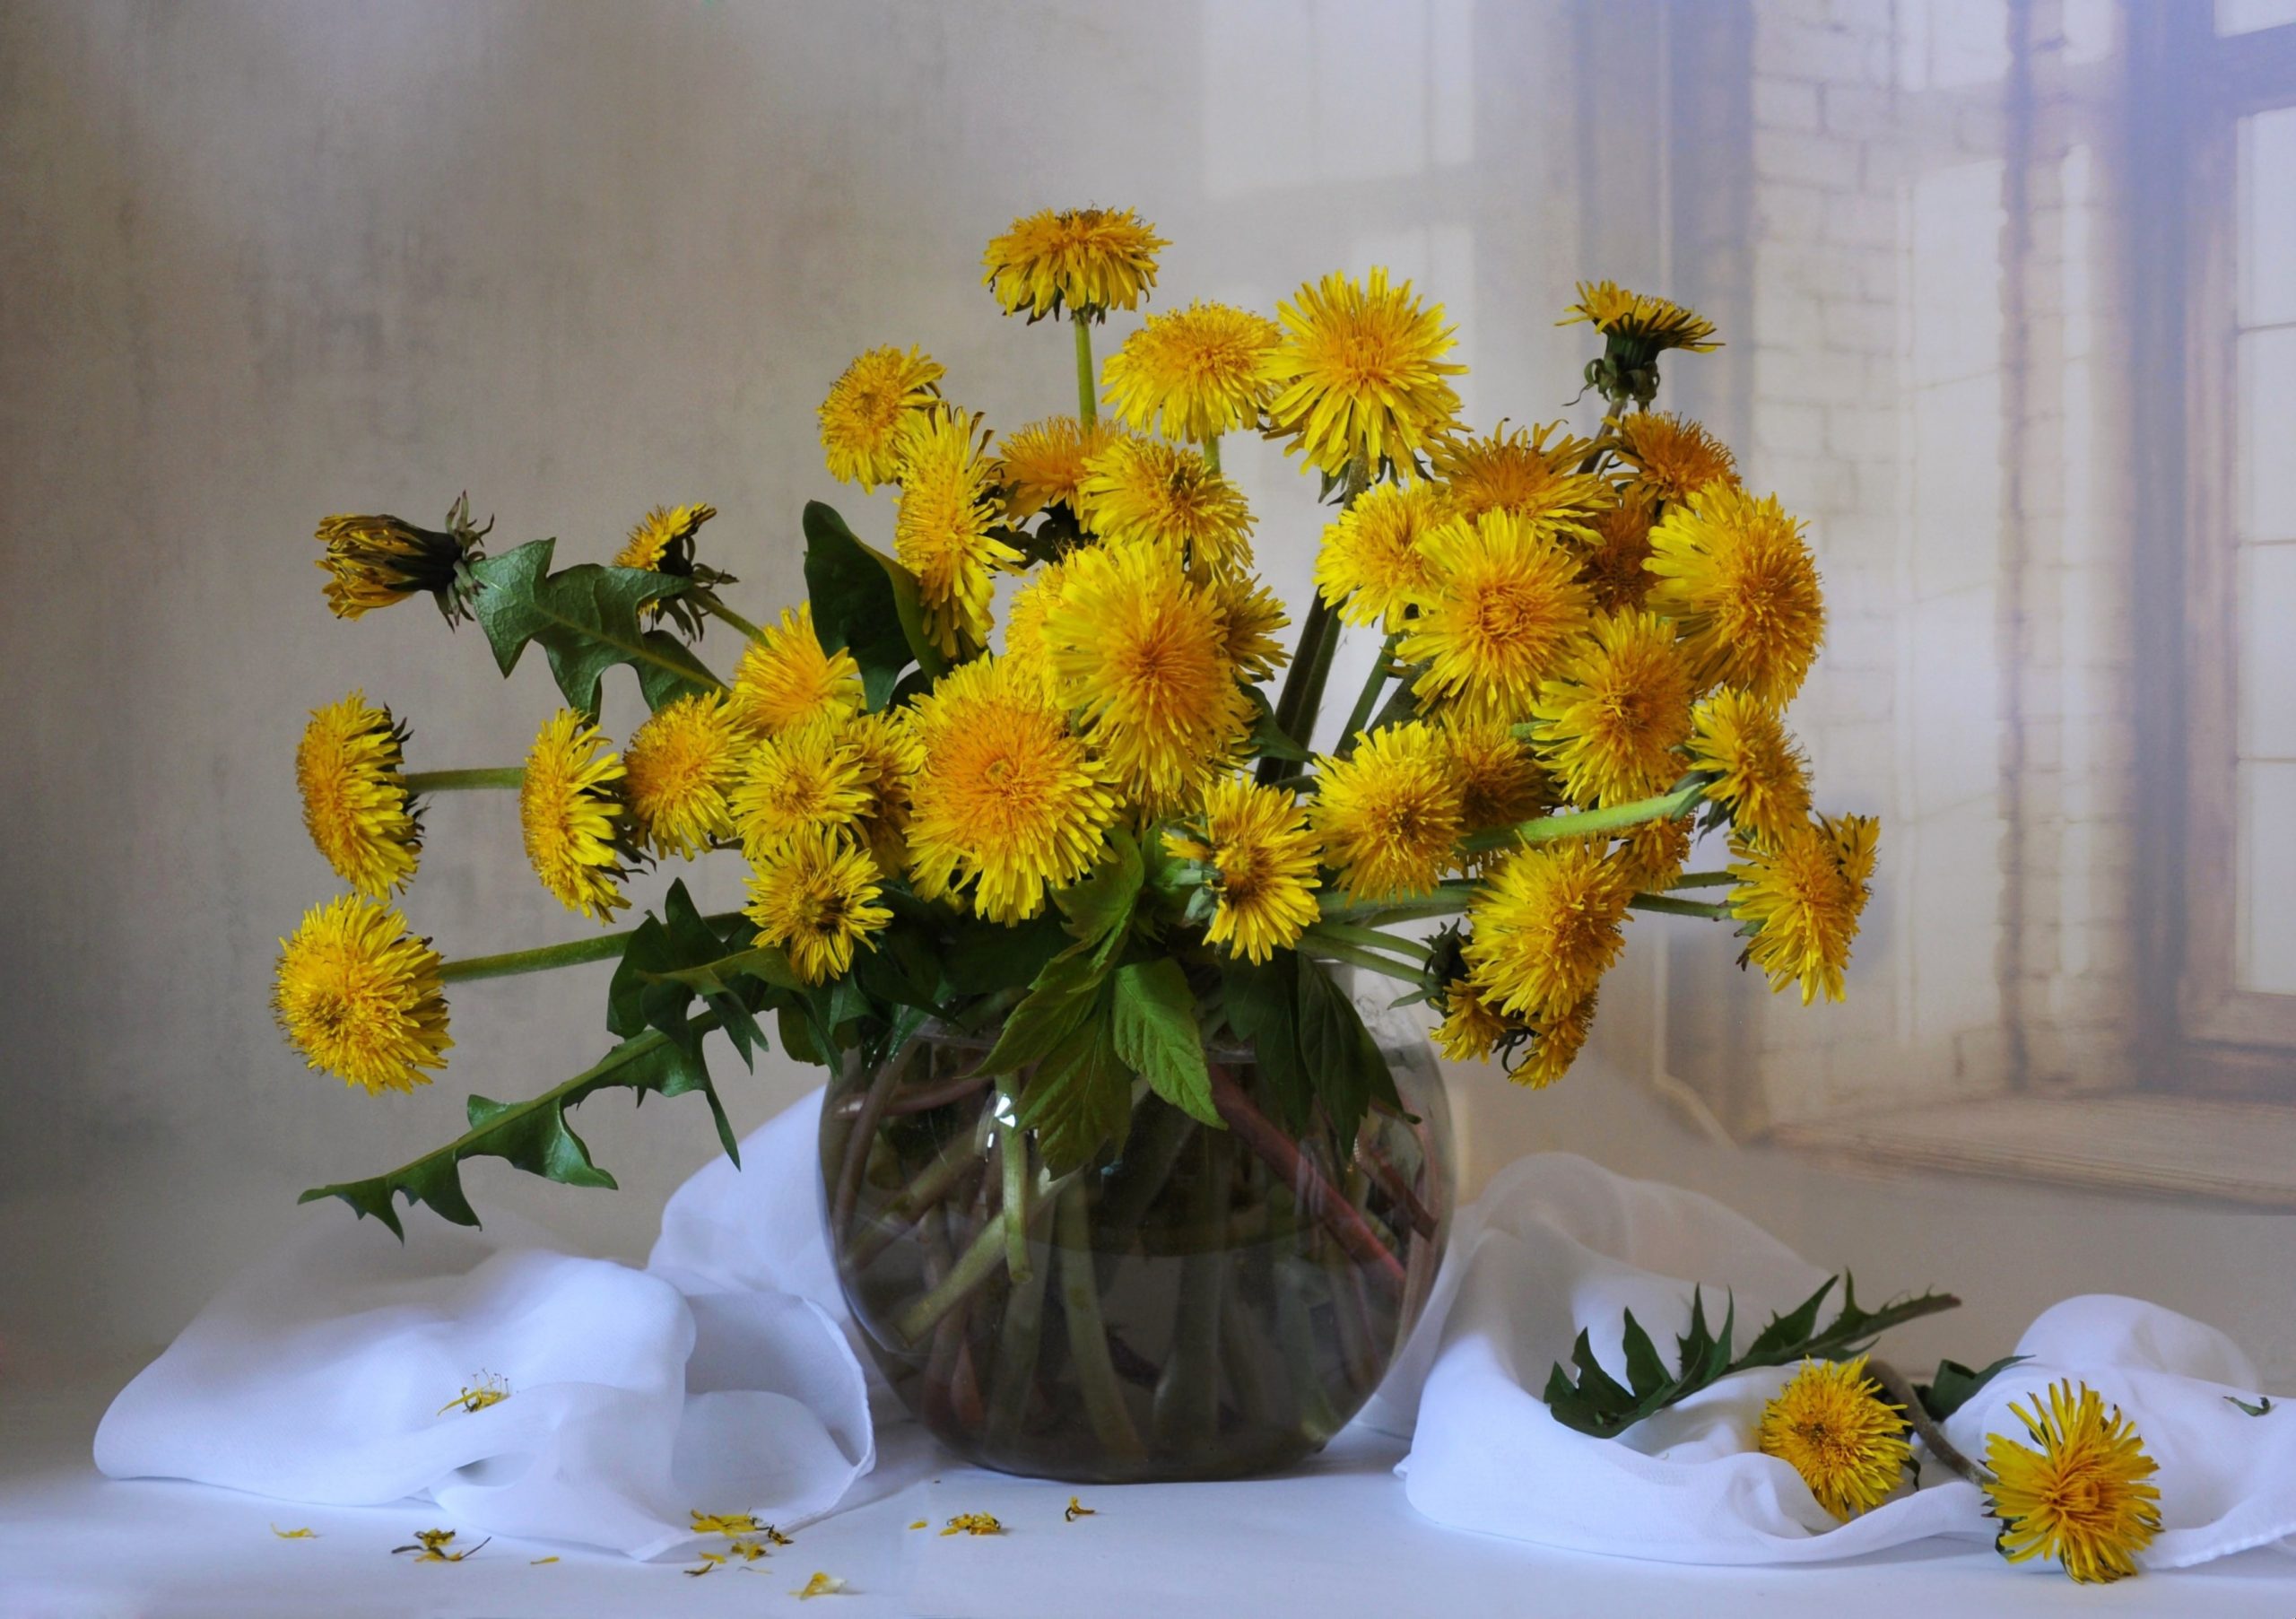 How to Make a Flower Crown with Dandelions